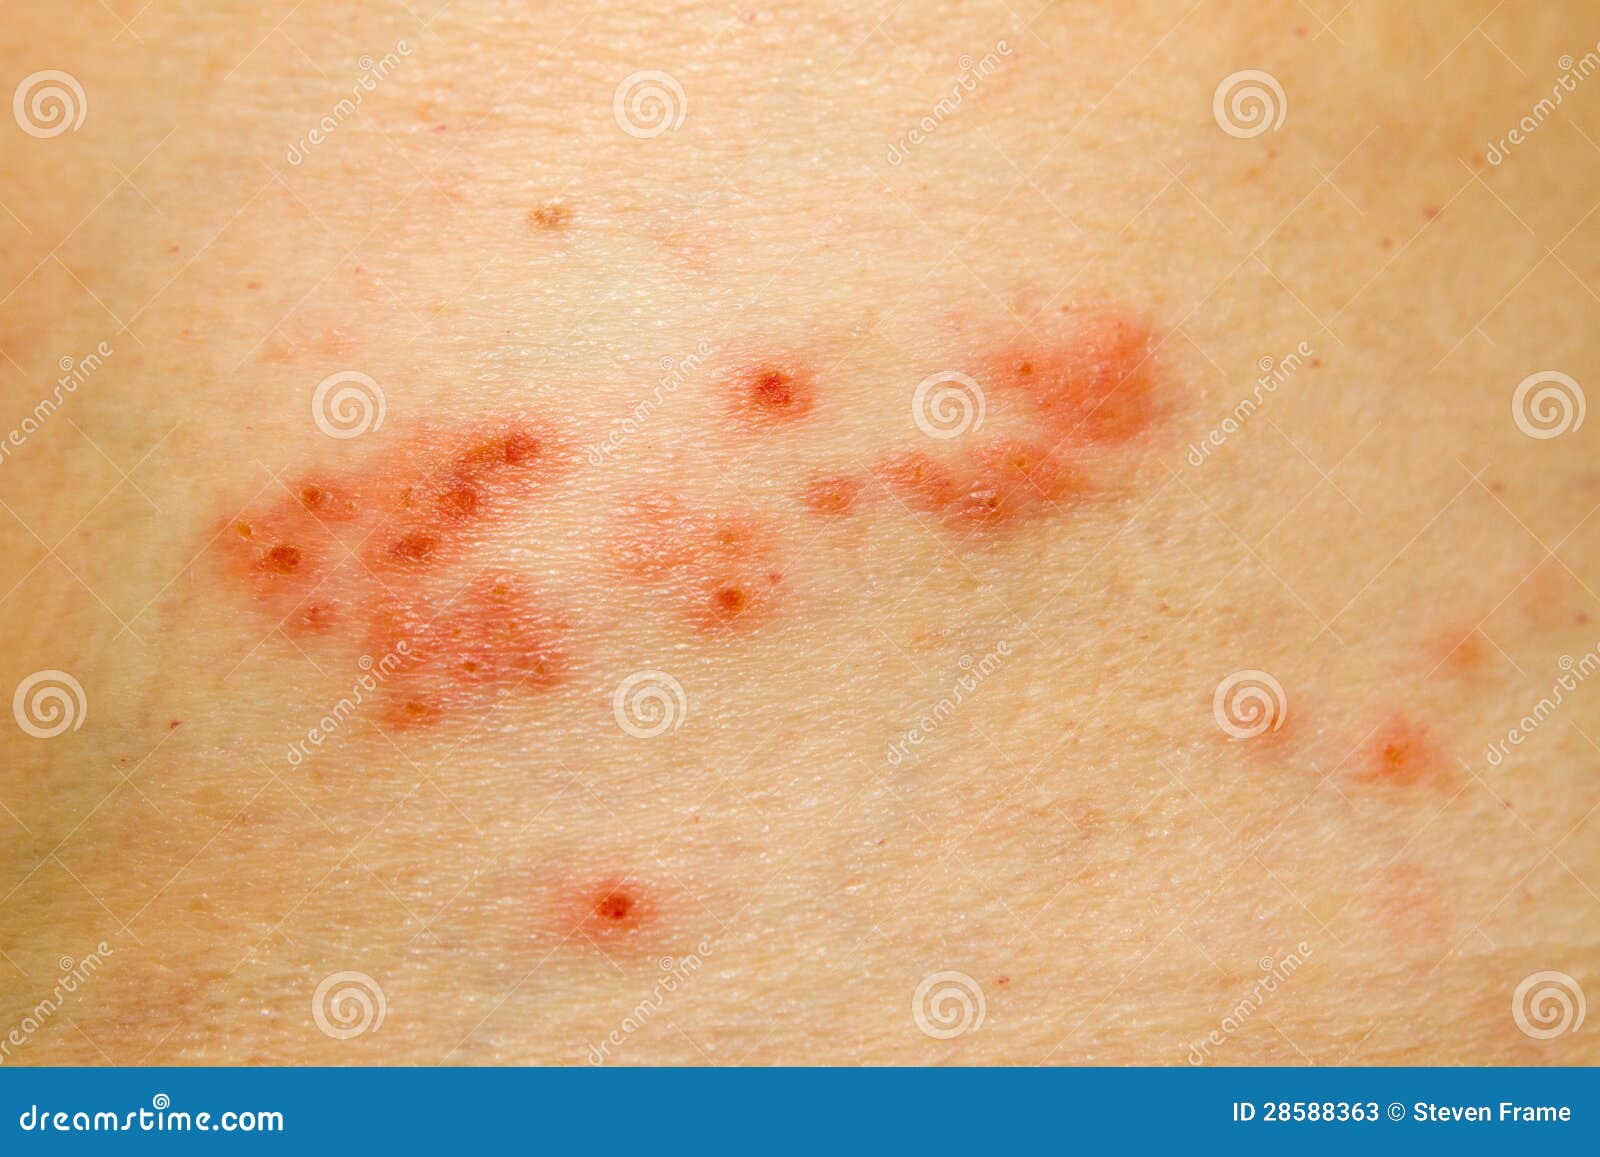 herpes on thigh picture #10